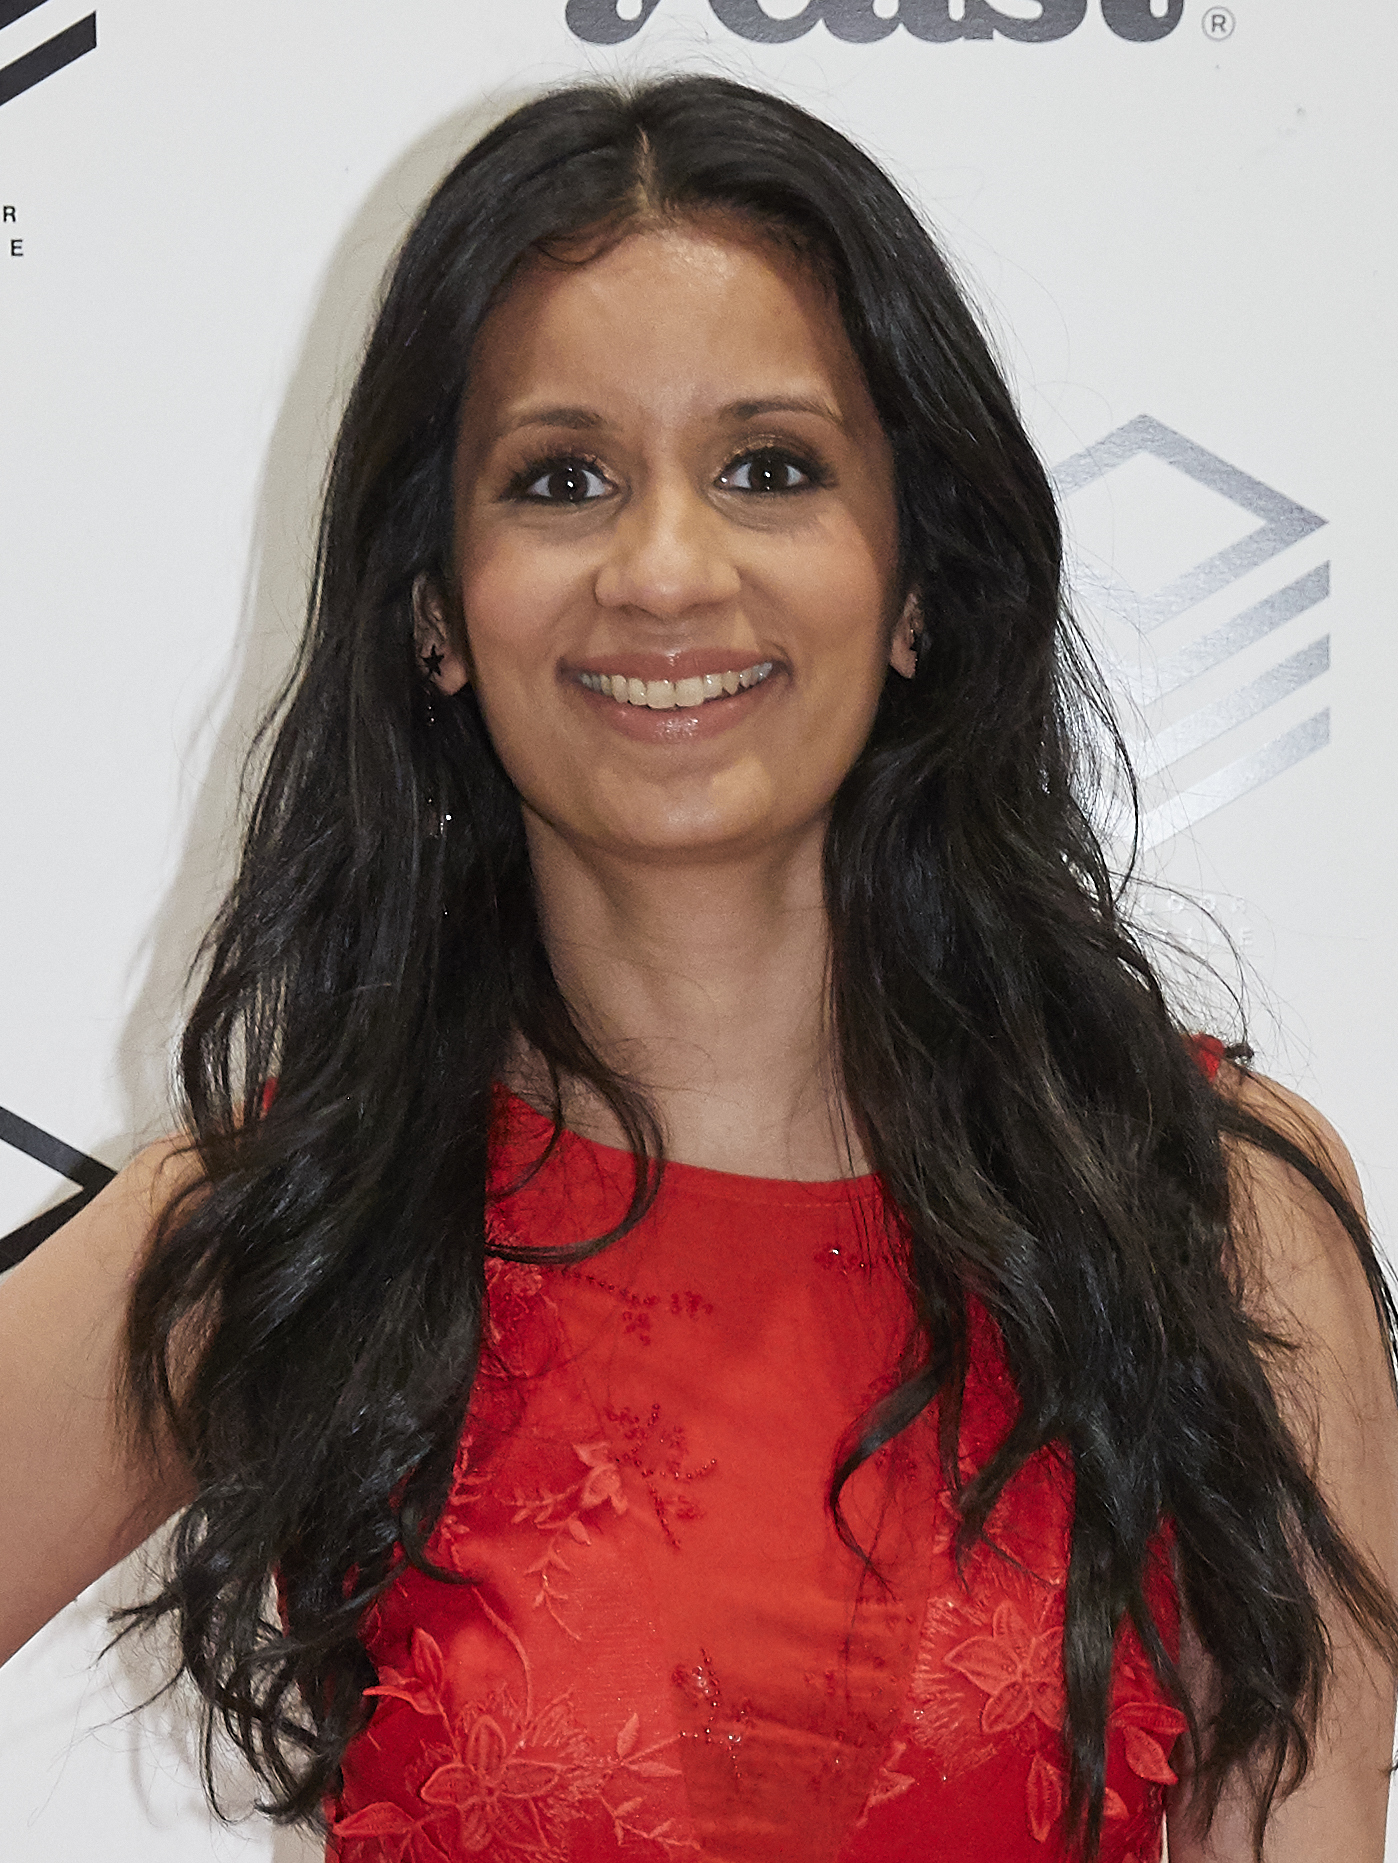 Shah in 2018